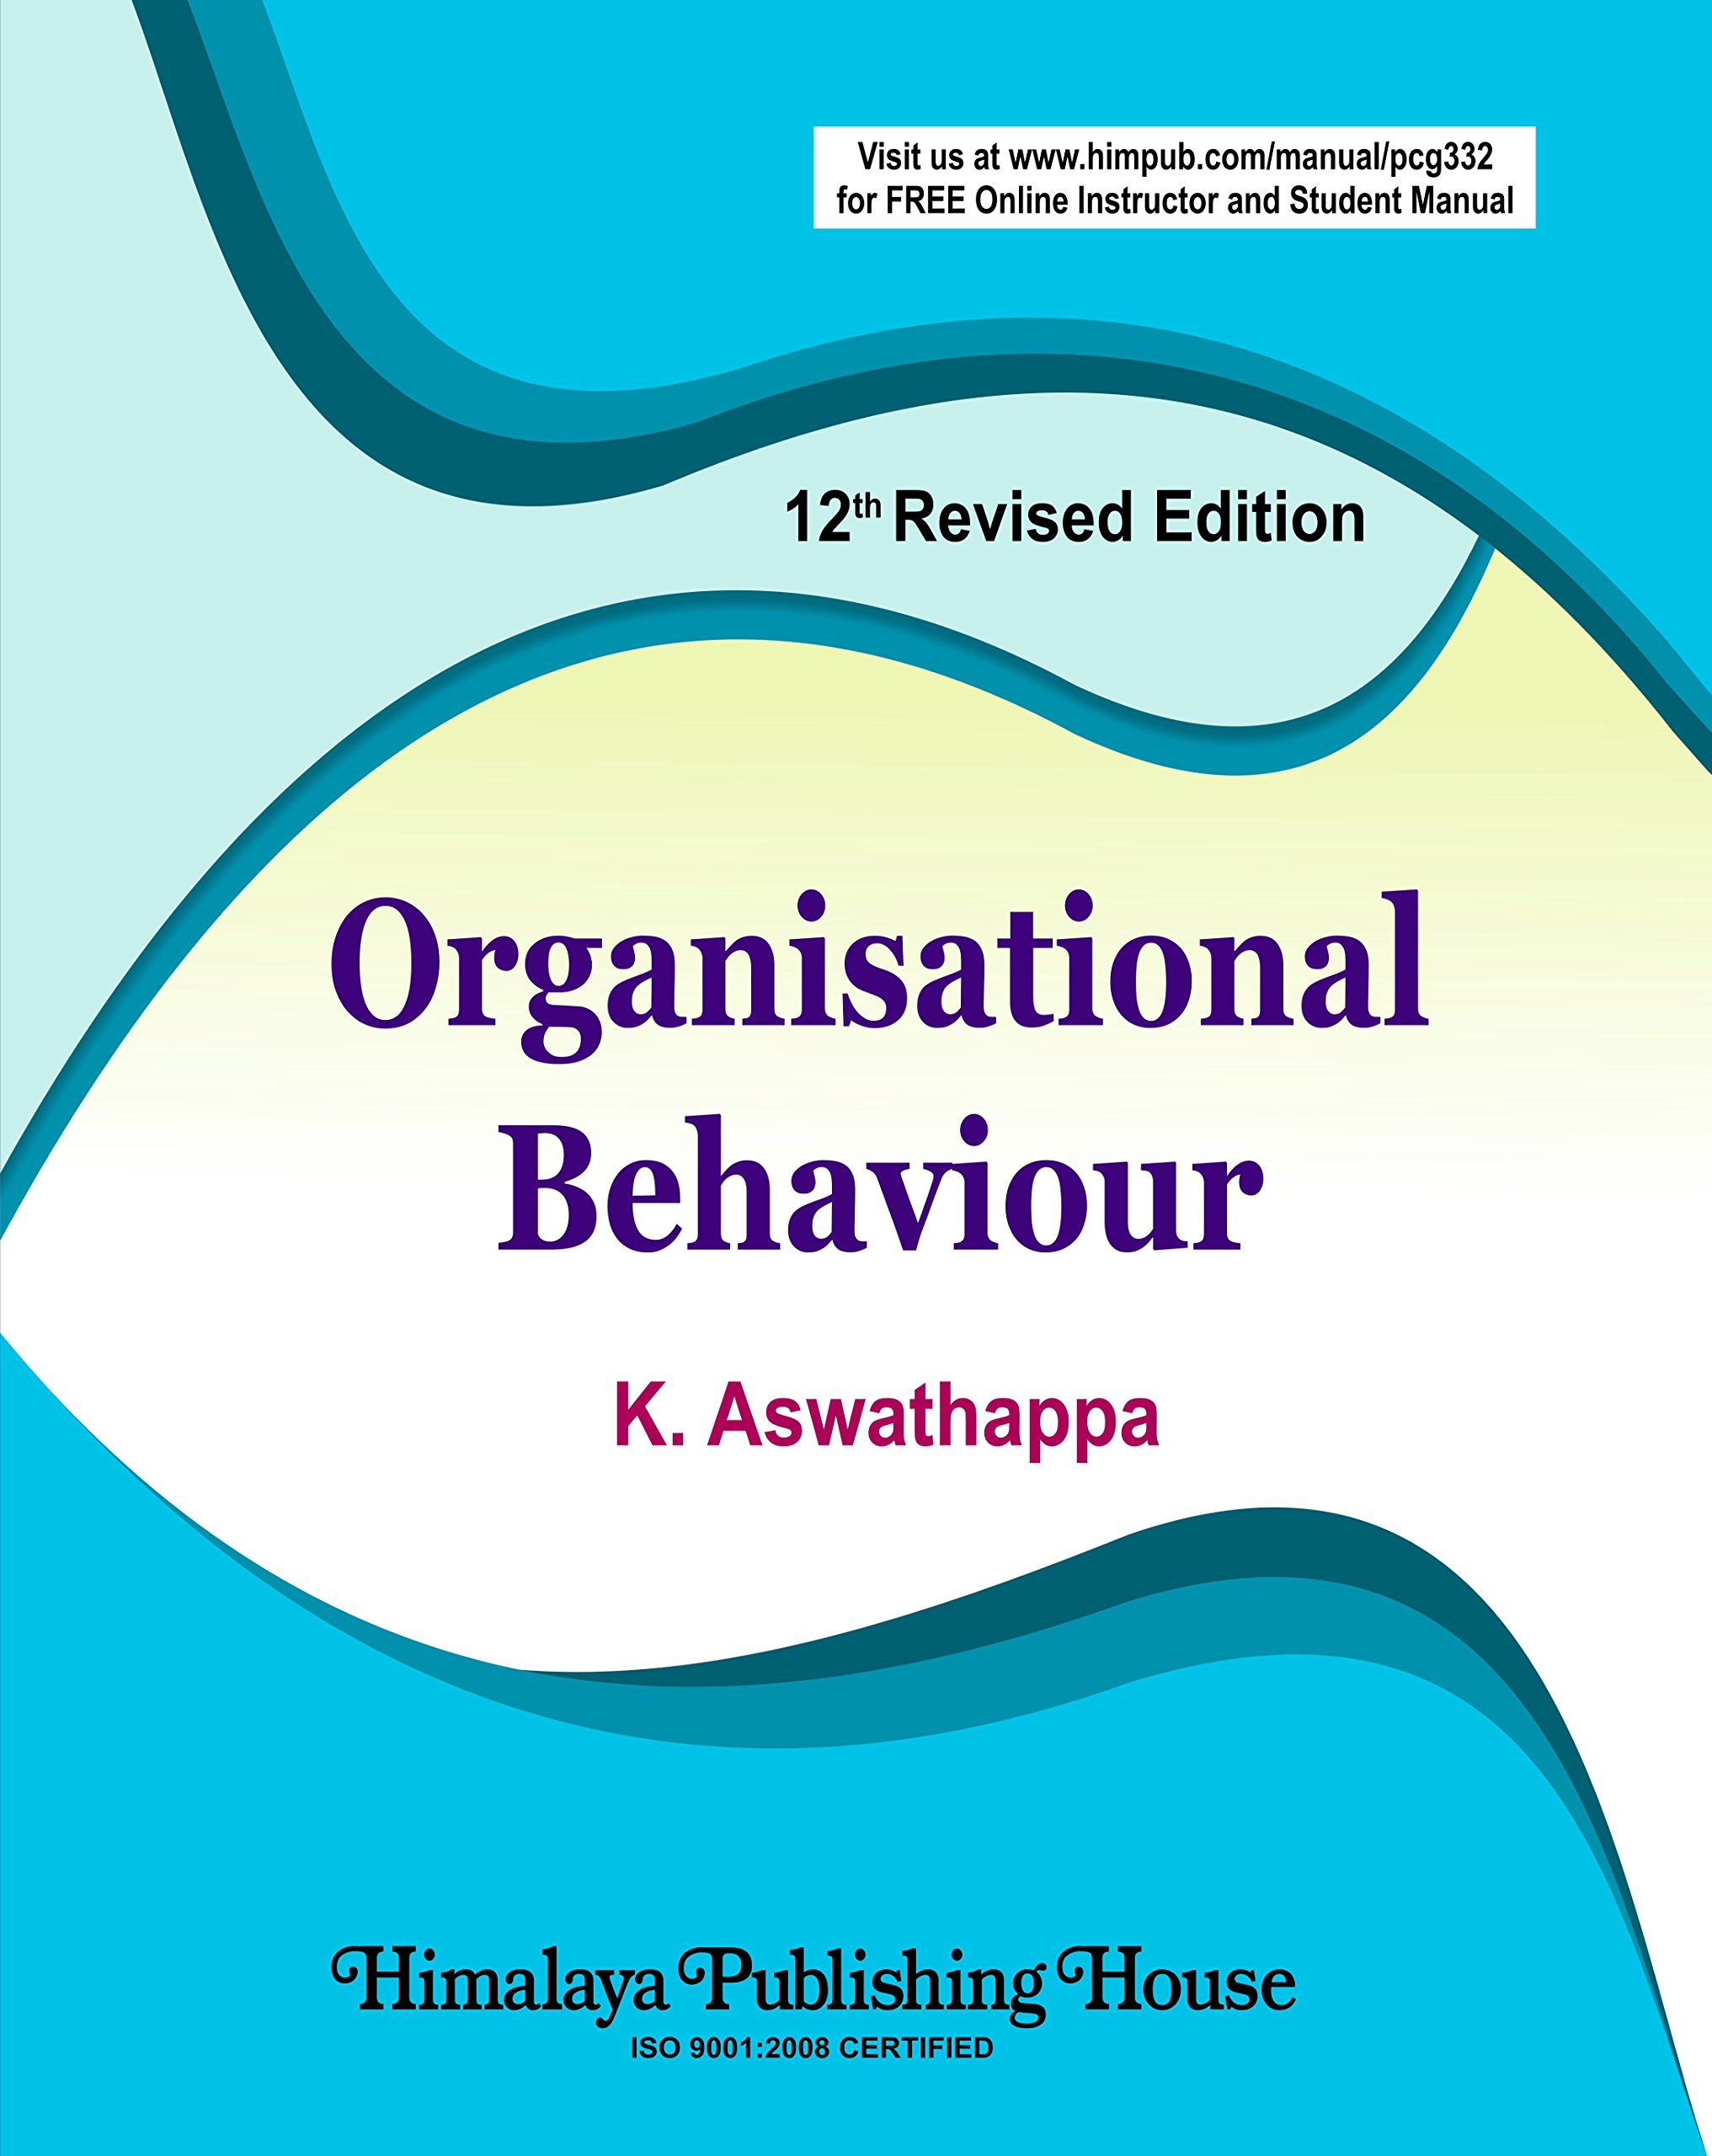 management concept and organisational behaviour pdf in hindi